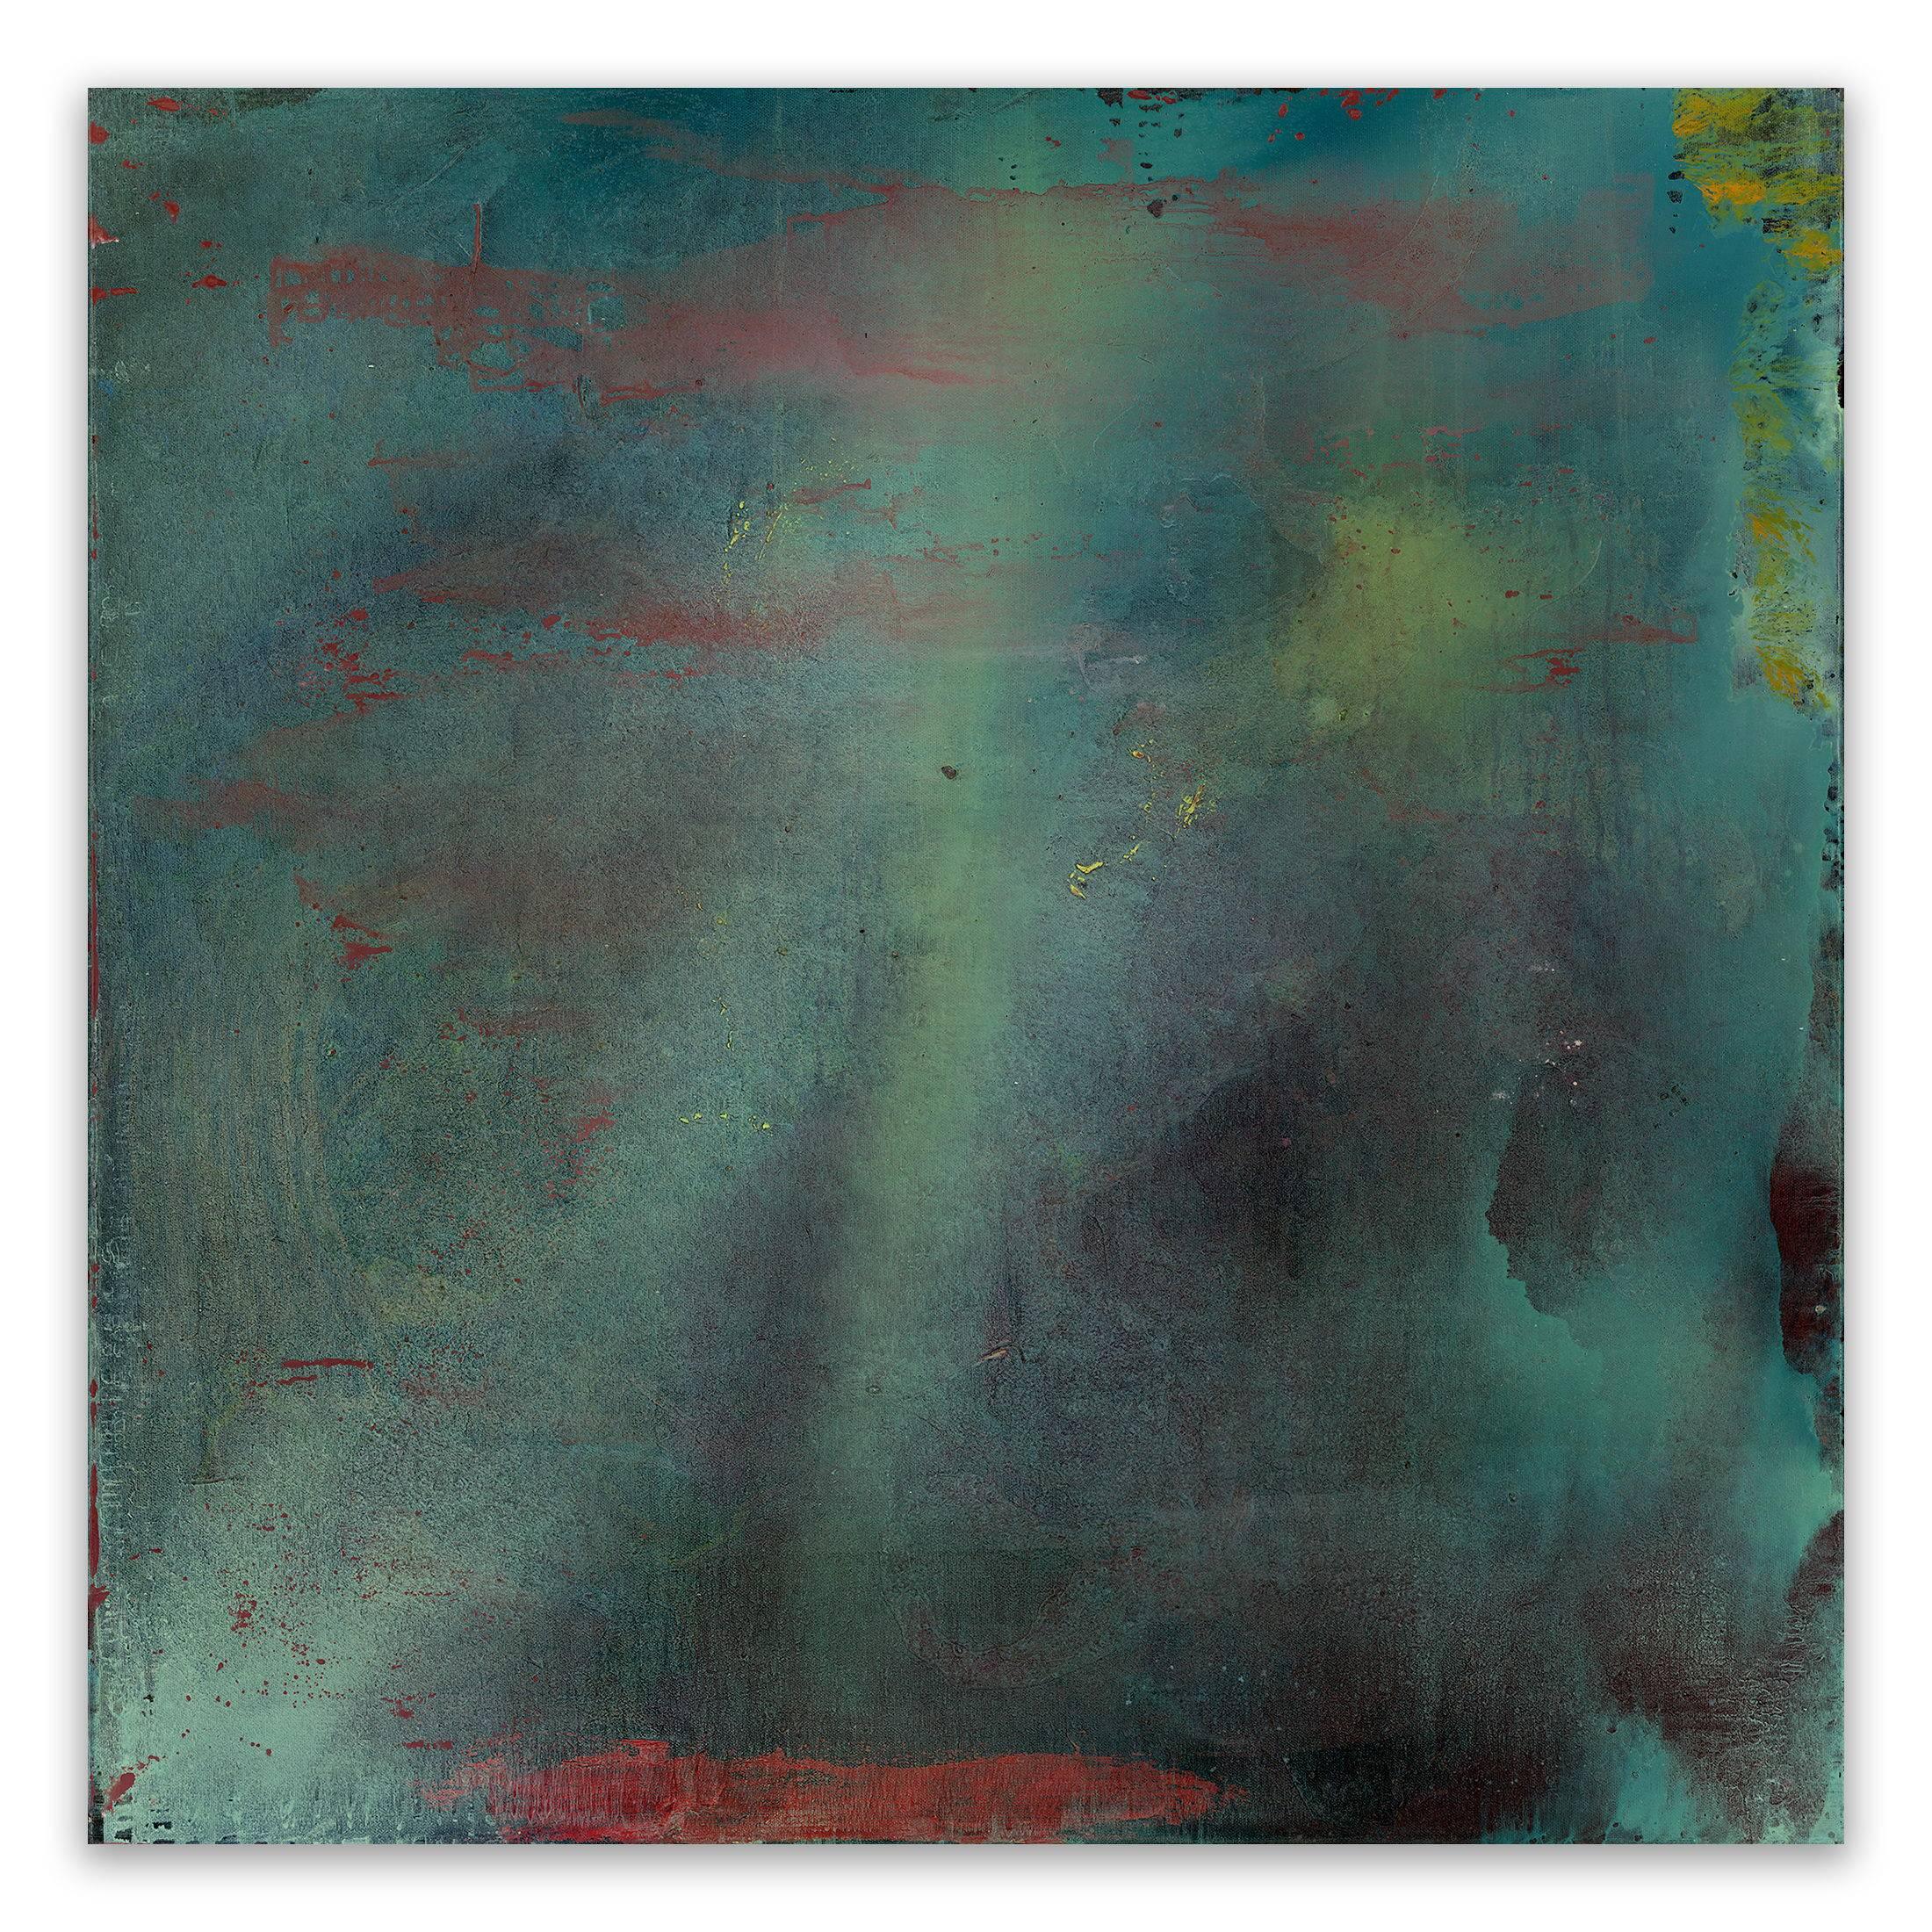 Numinous No 16 (Abstract Painting)

Oil on canvas - Unframed

Natural and mystical processes inspire Ostovany. Informed by a variety of different cultures, Ostovany feels a connection to multiple separate and yet complementary mystical